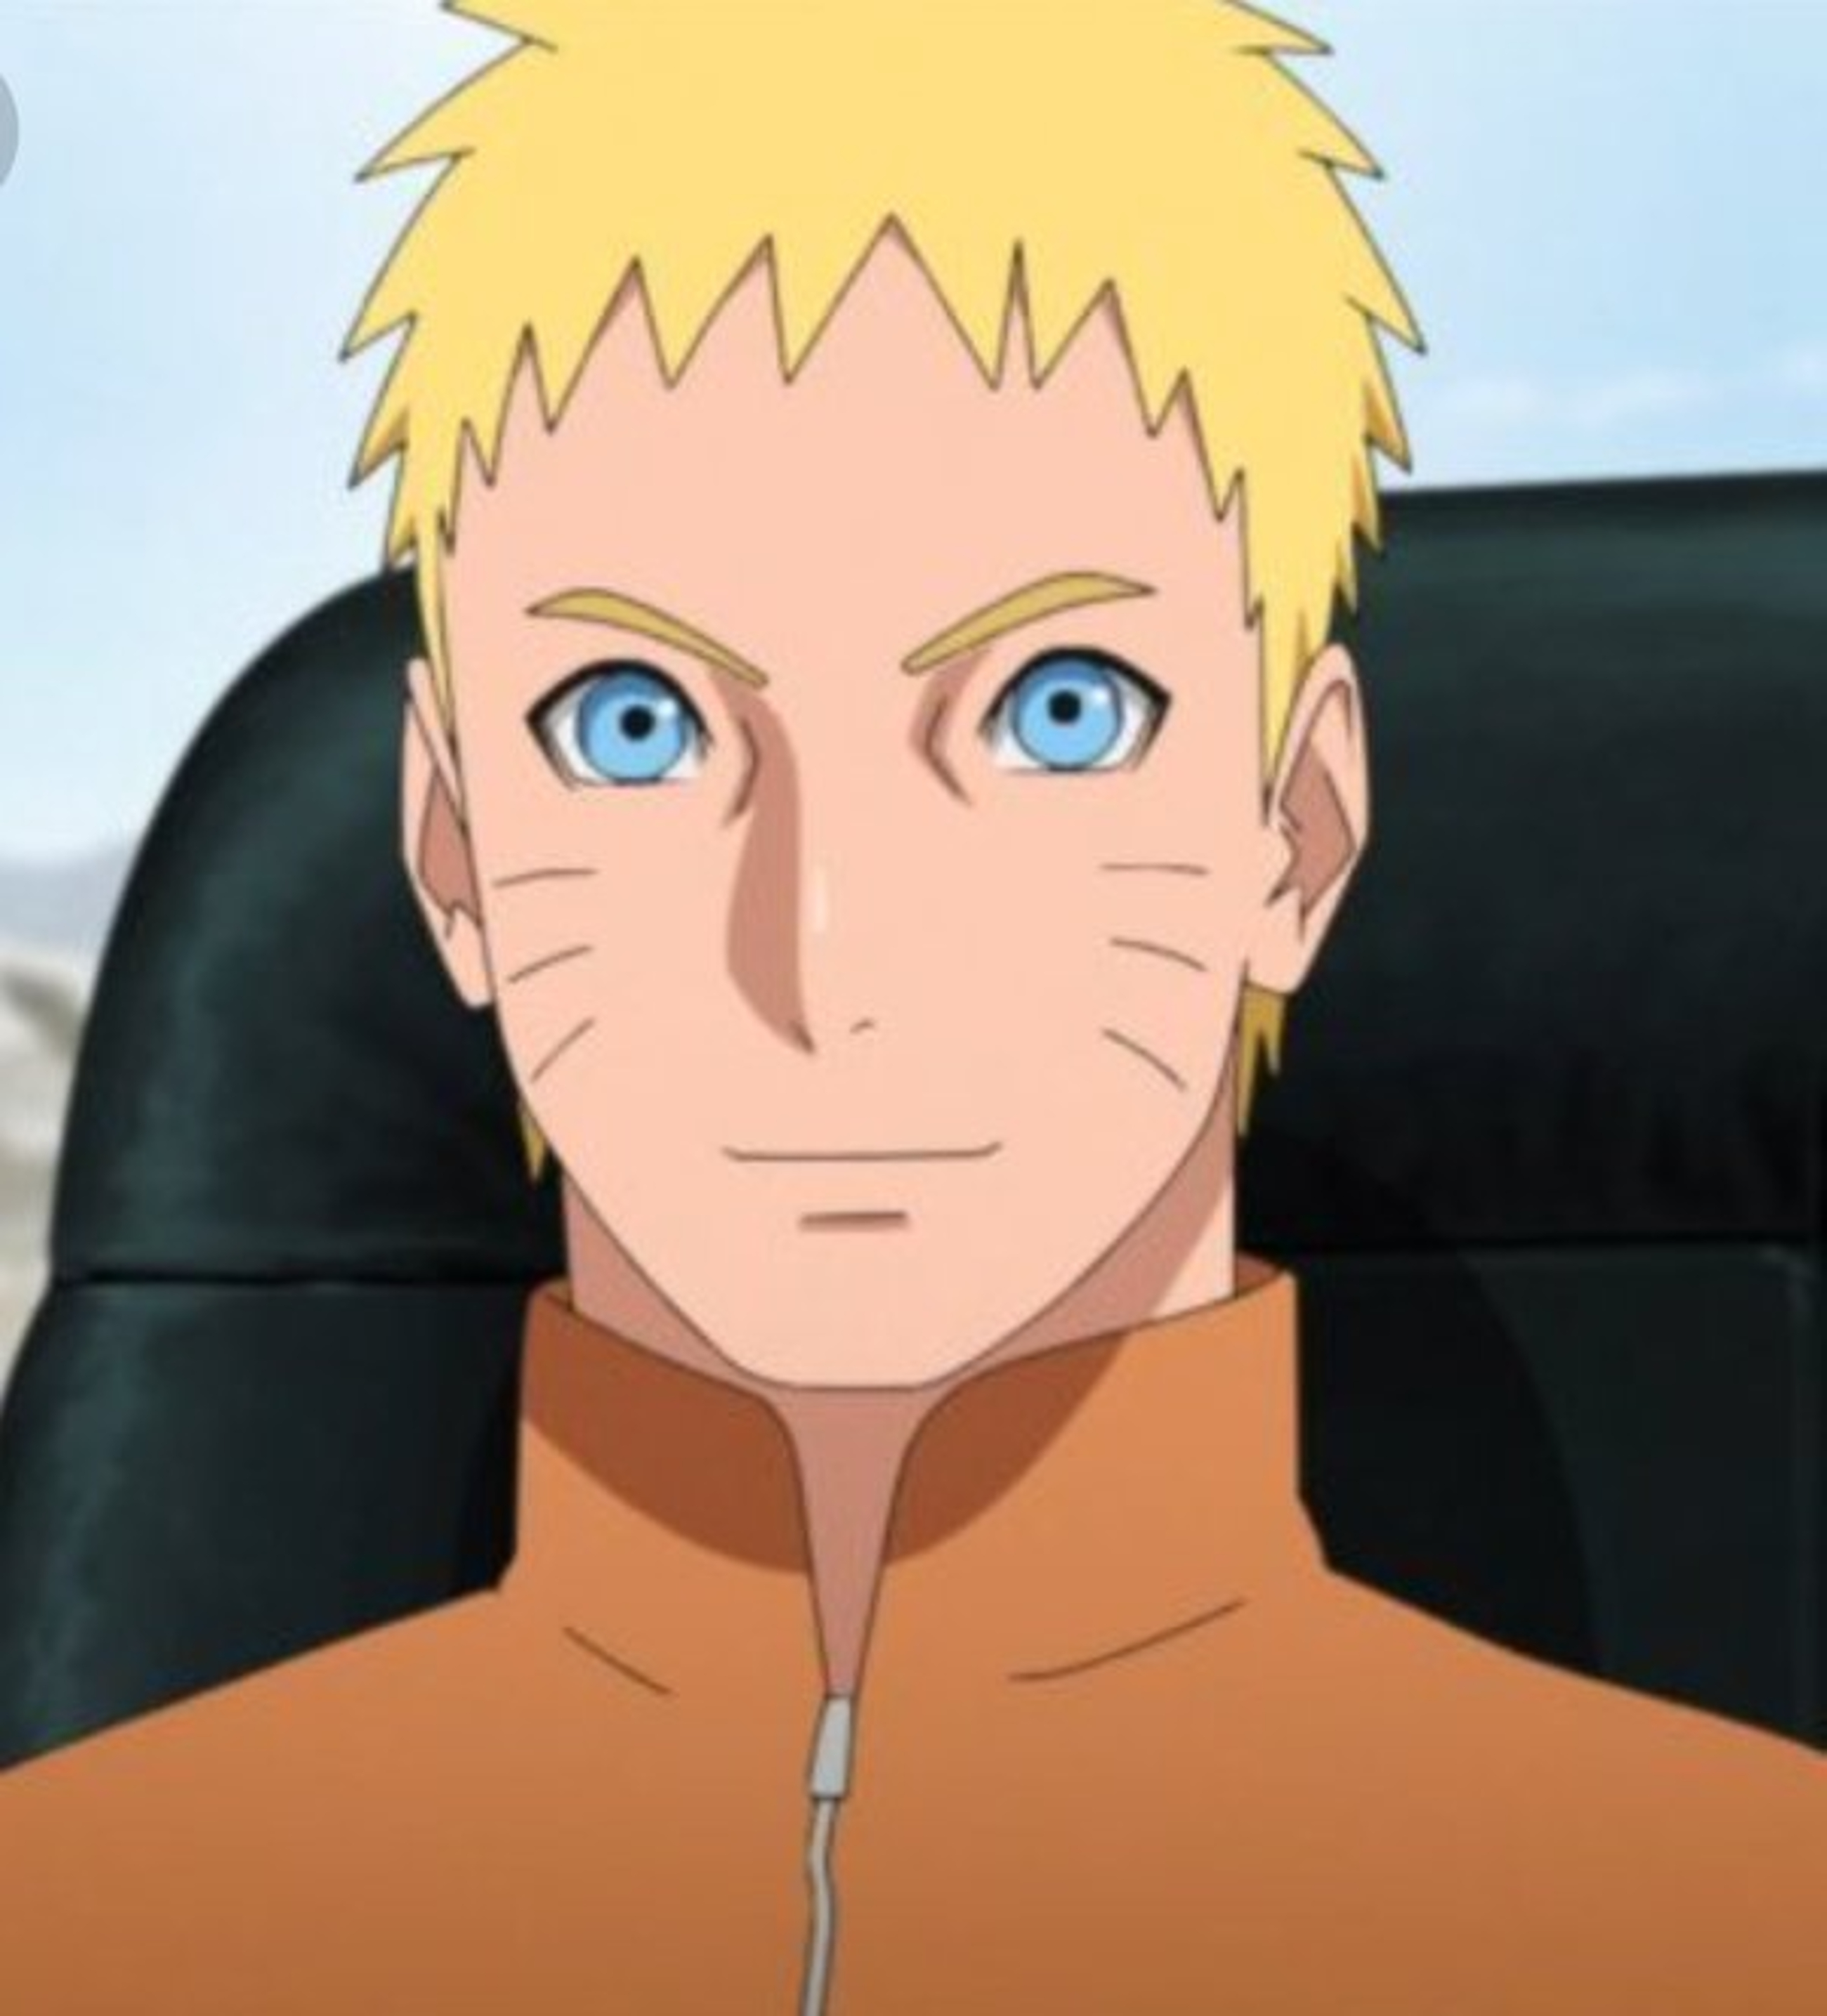 Naruto: The Hokage's Responsibility - What if Fanfics